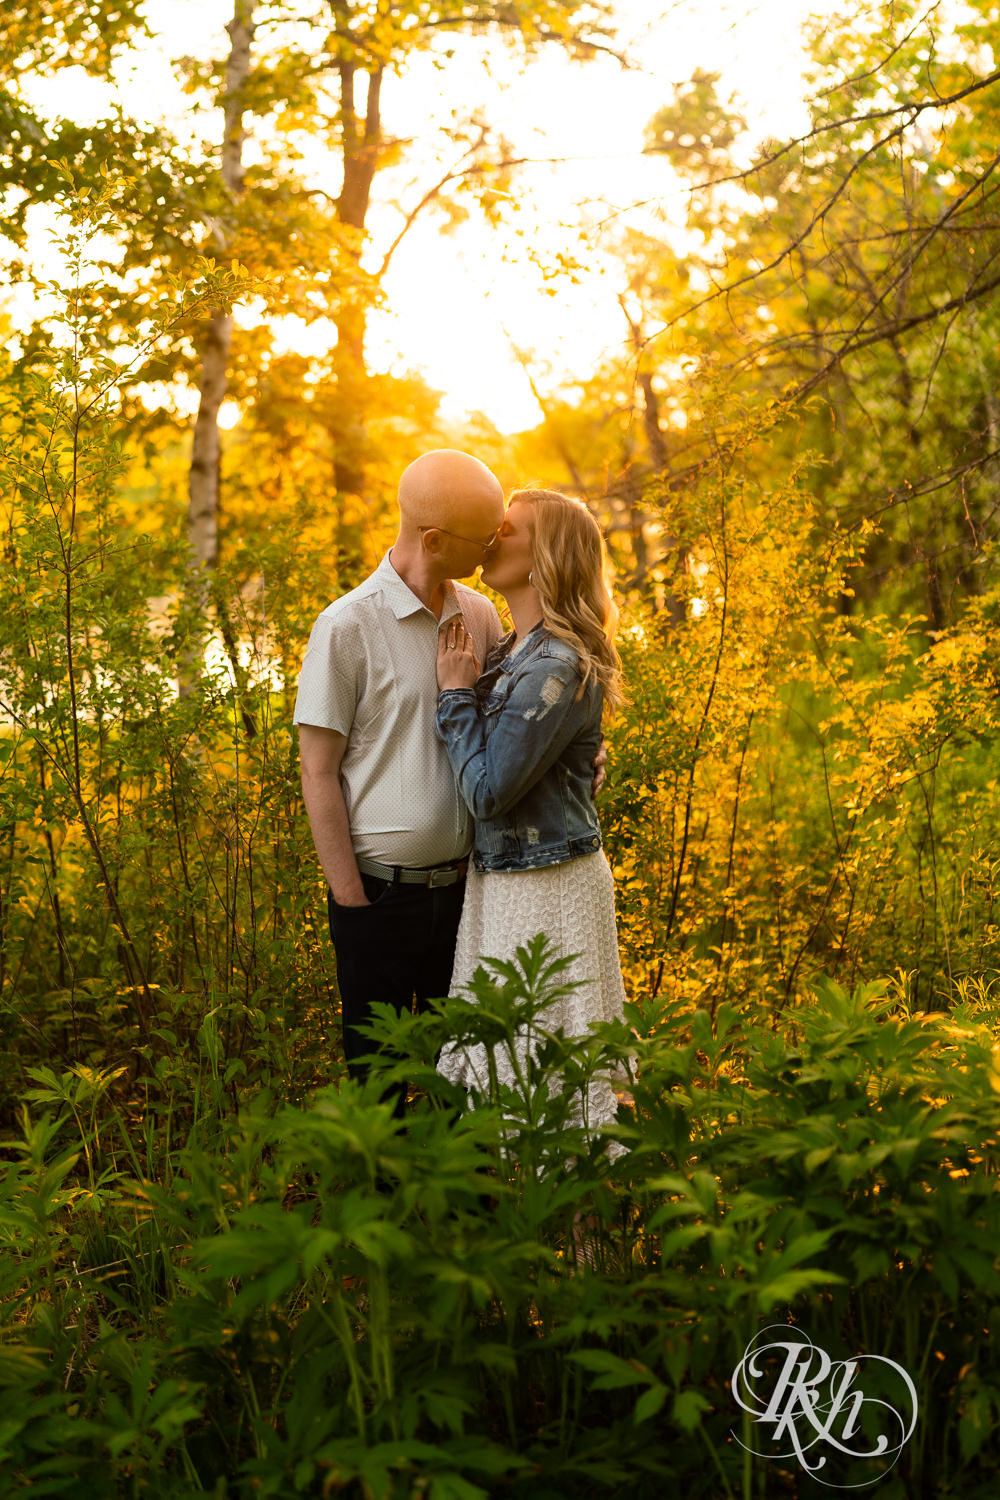 Man in white shirt and blonde woman in white dress and denim kiss at sunset in Lebanon Hills Regional Park in Eagan, Minnesota.